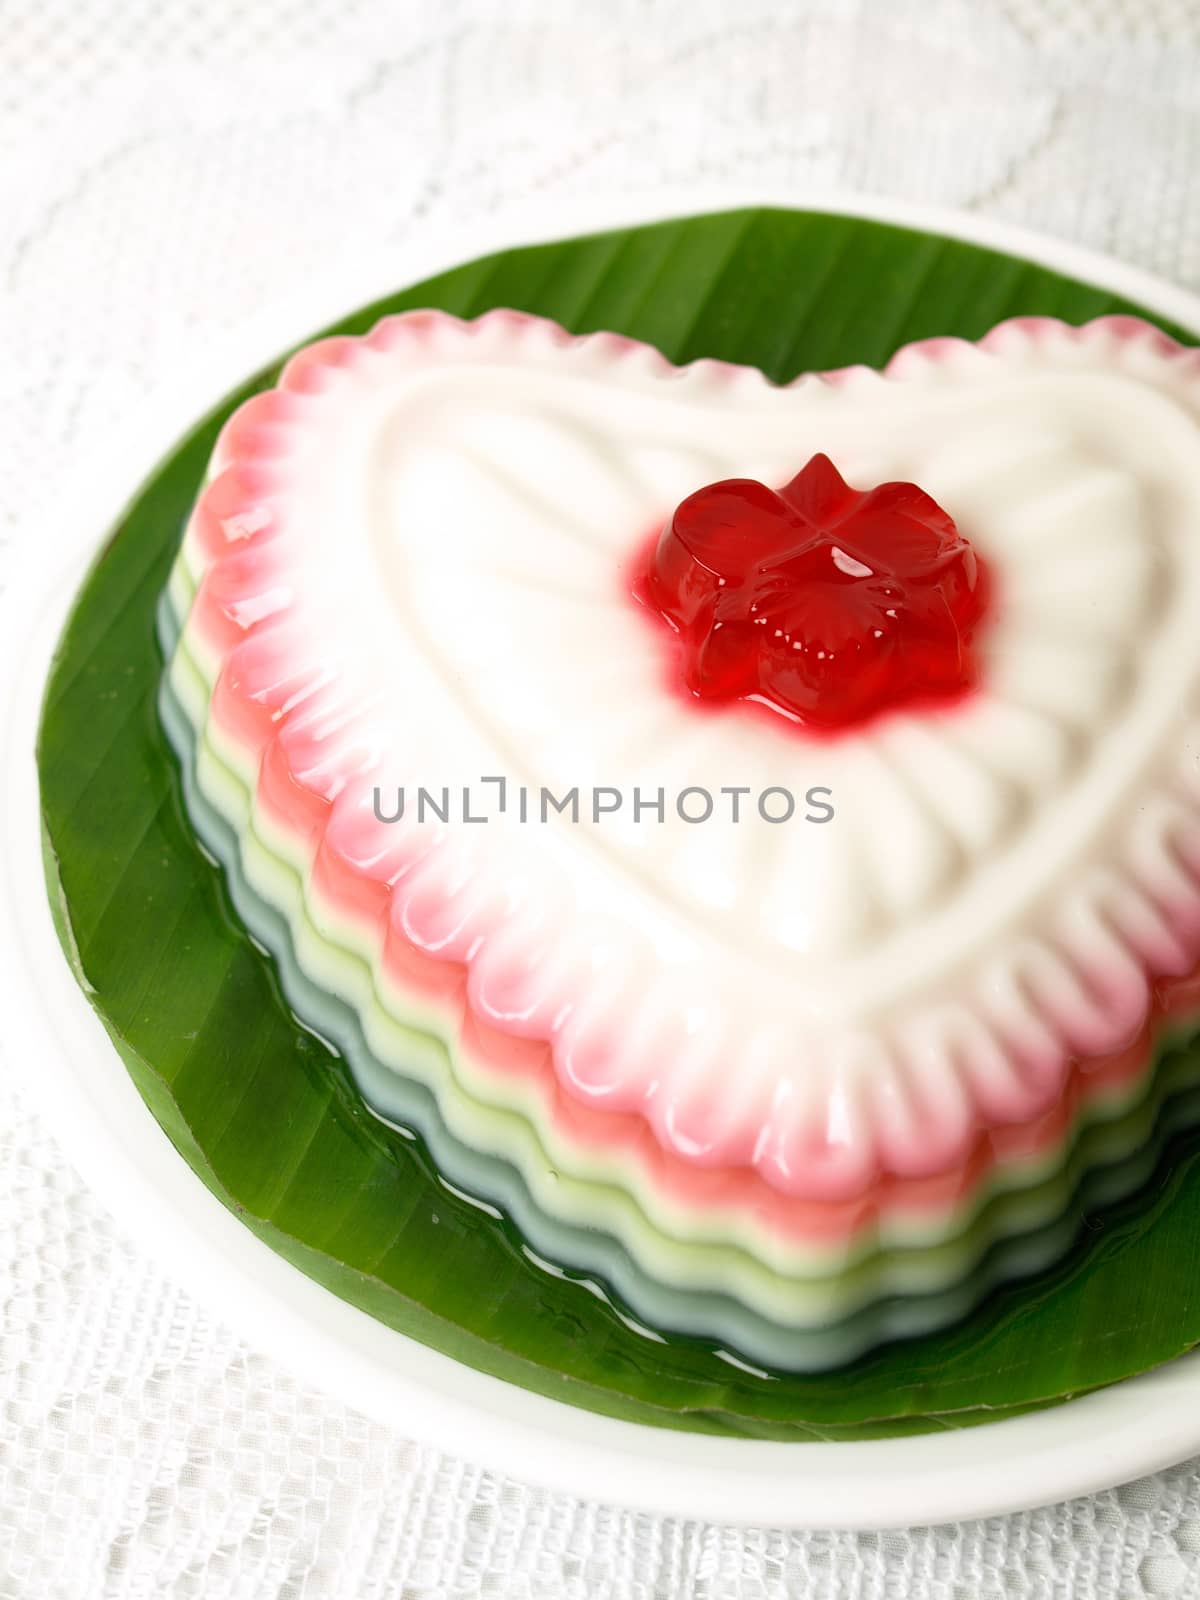 Coconut jelly Thai dessert with Look Choup by simpleBE